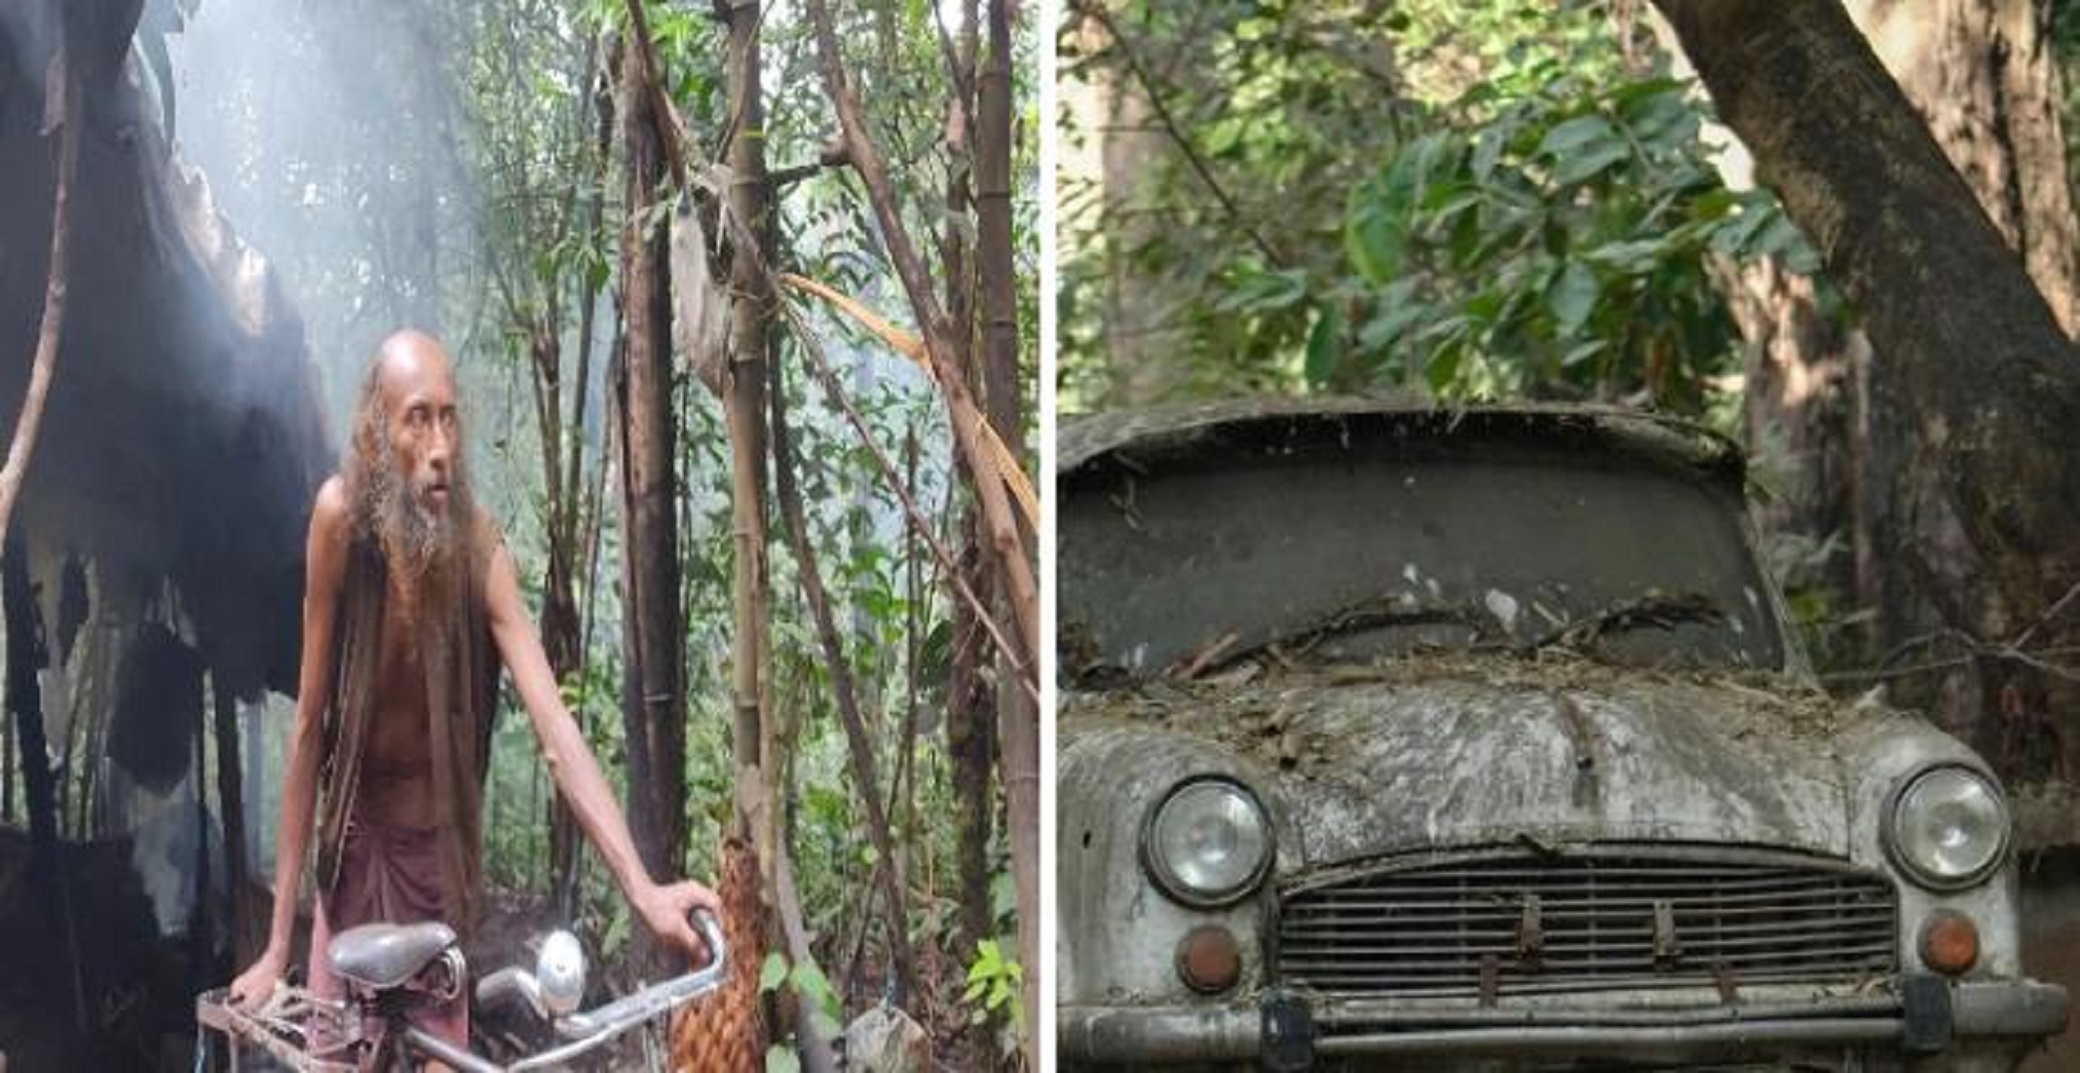 This Karnataka Man Has Been Living In A Car Parked In Jungle For Over 17 Years Now